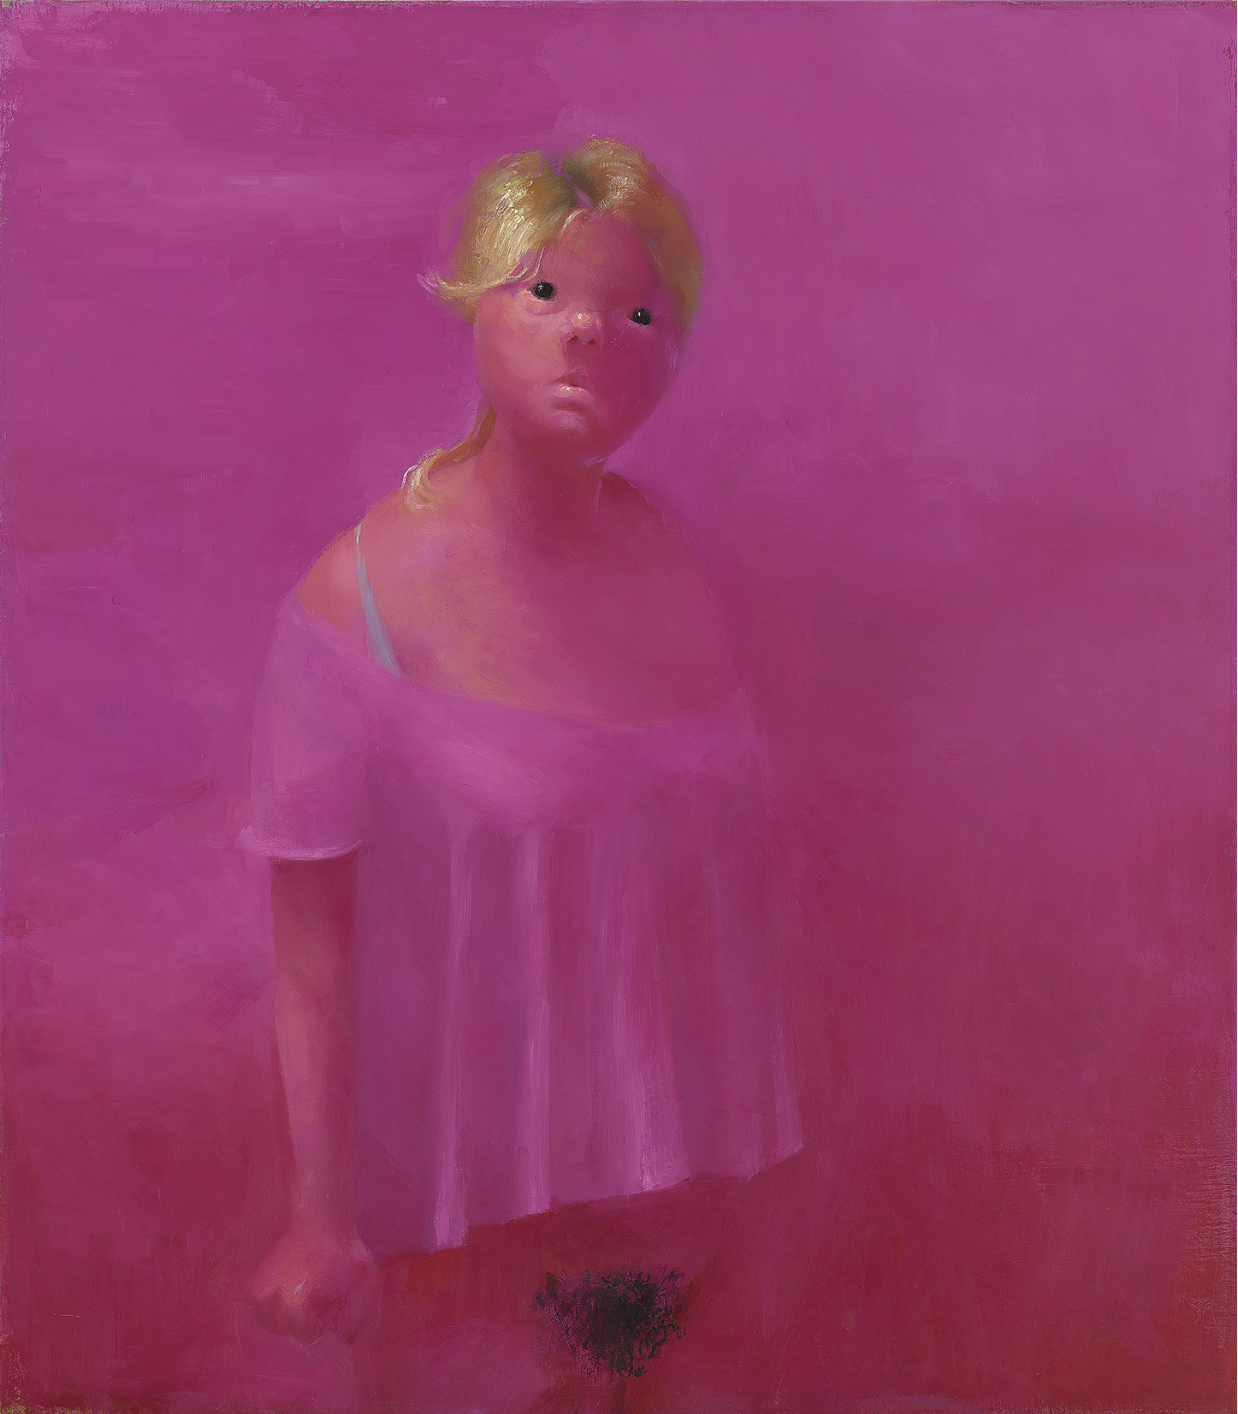 Lisa Yuskavage, <em>The Ones That Don't Want To: Bad Baby</em>, 1991, Oil on linen, 86,7 x 76,2 cm. Private Collection